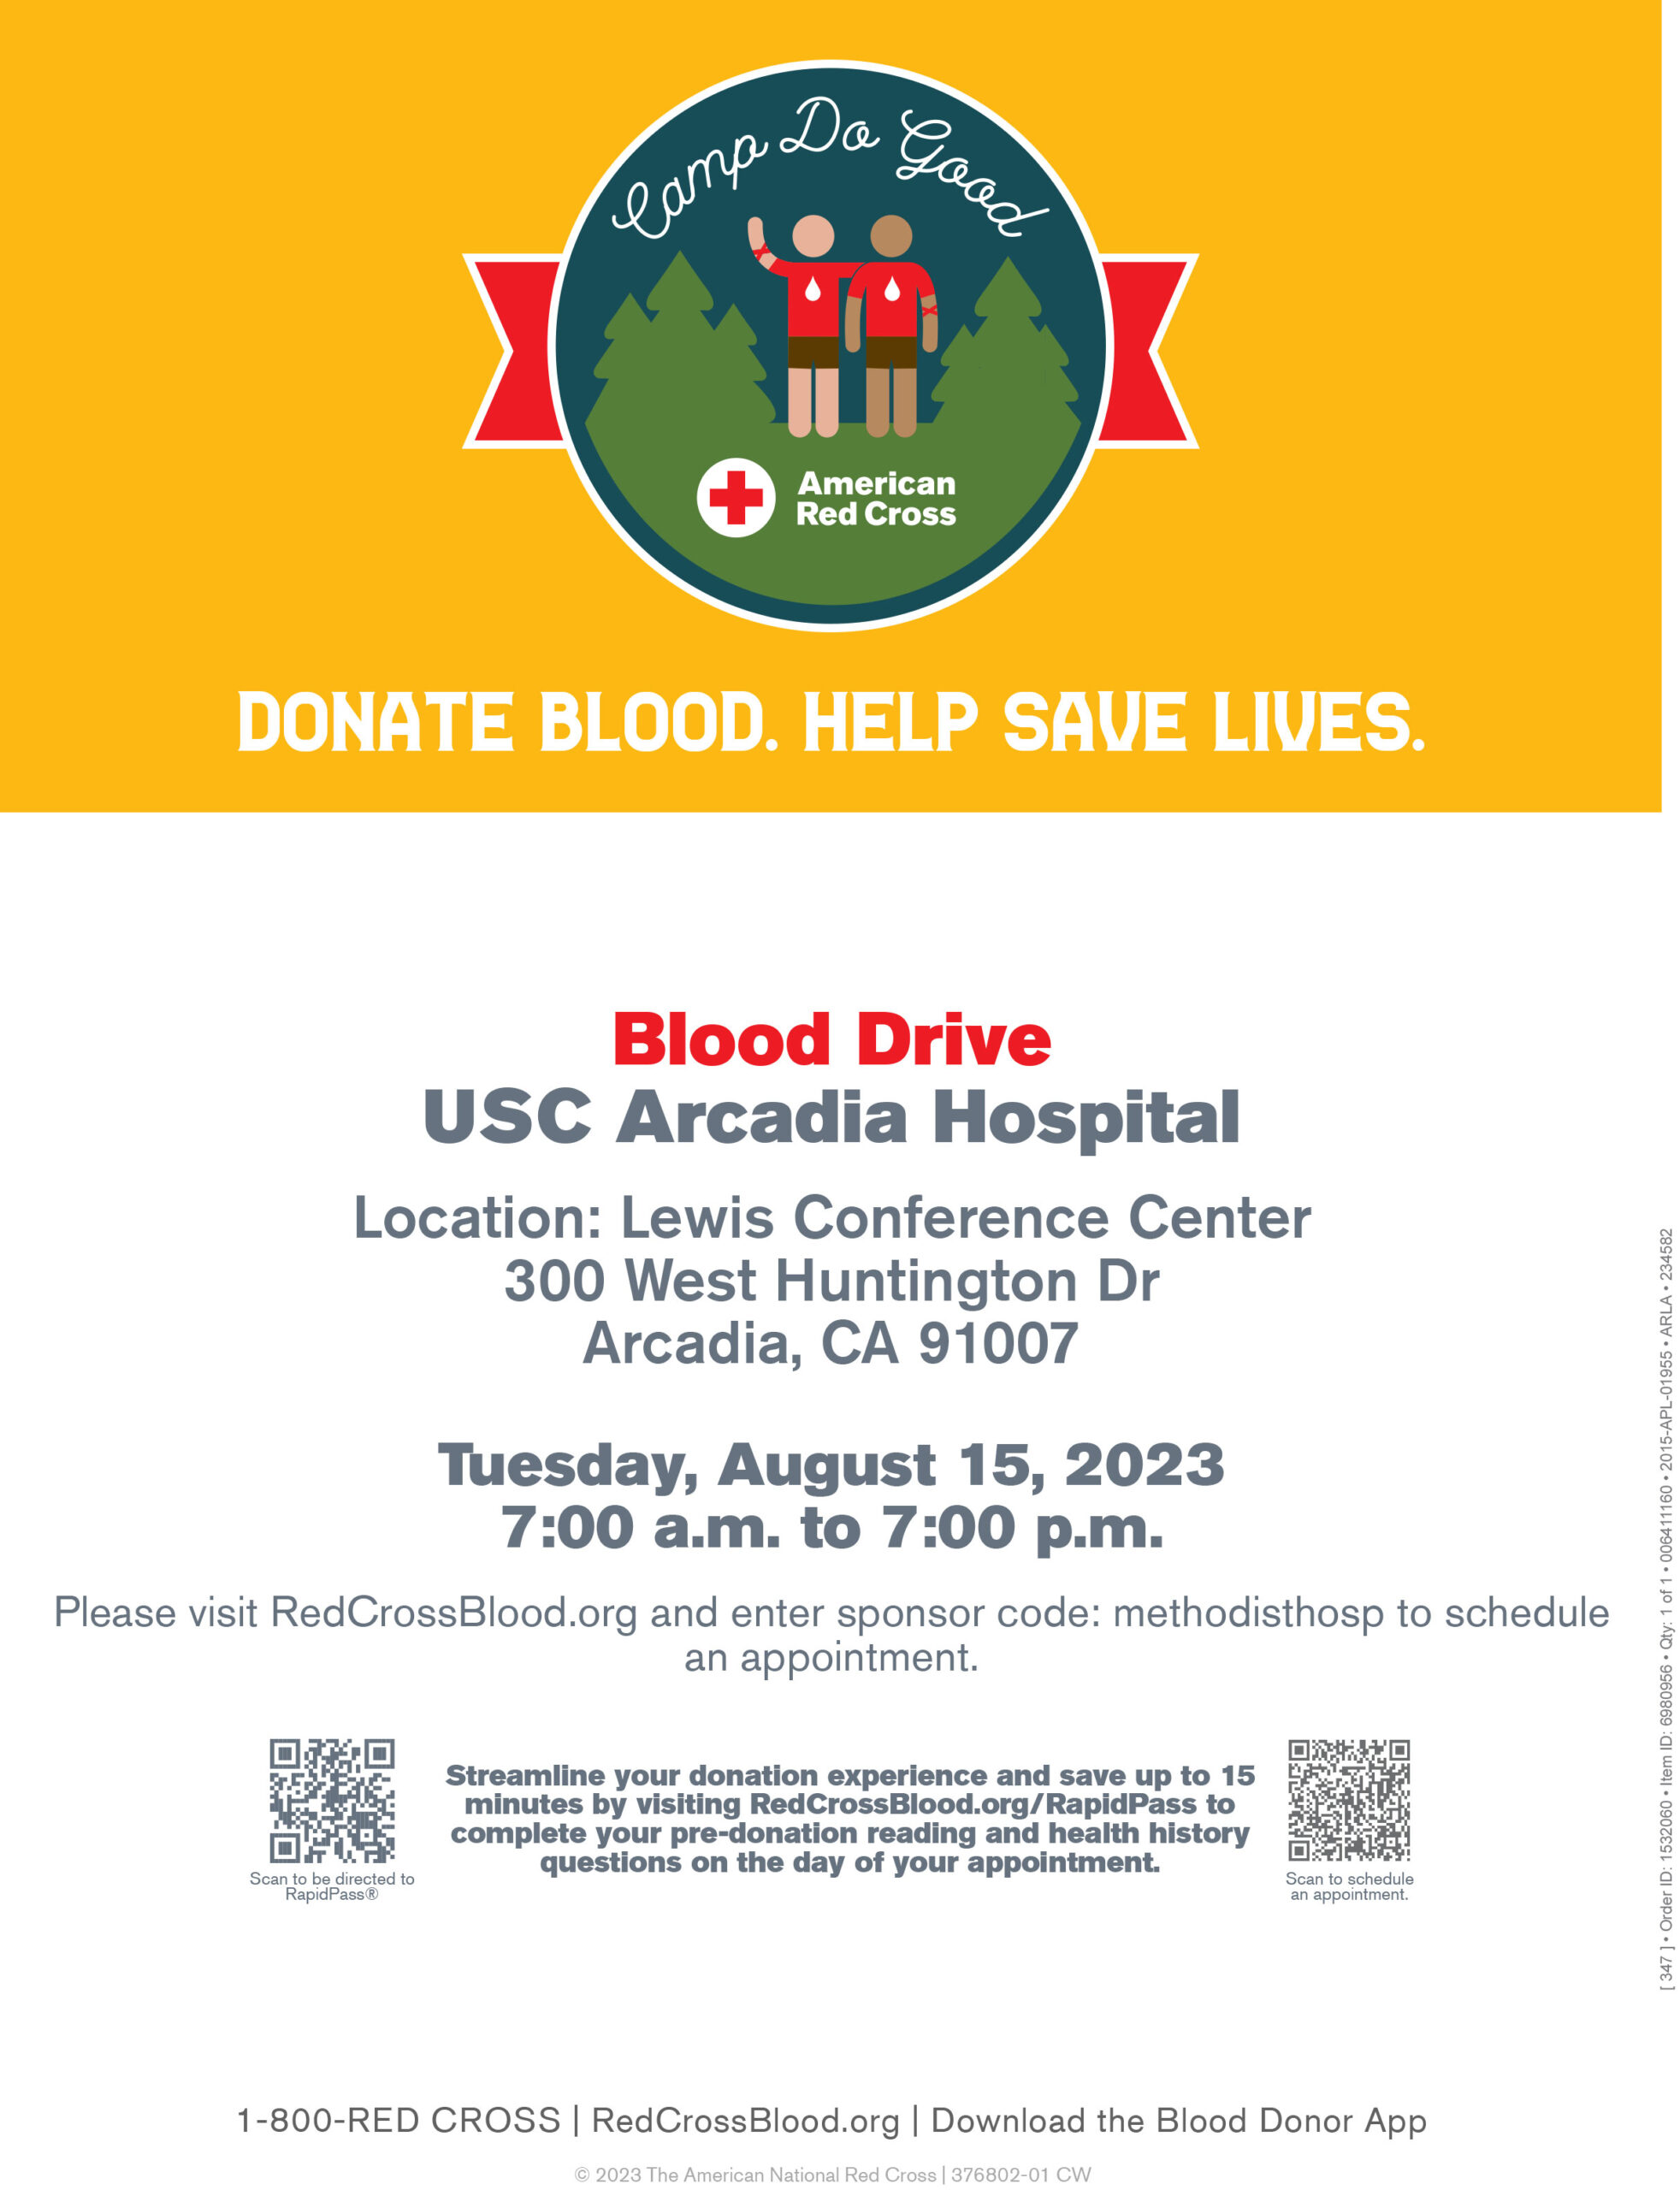 USC Arcadia Hospital Blood Drive for August 15